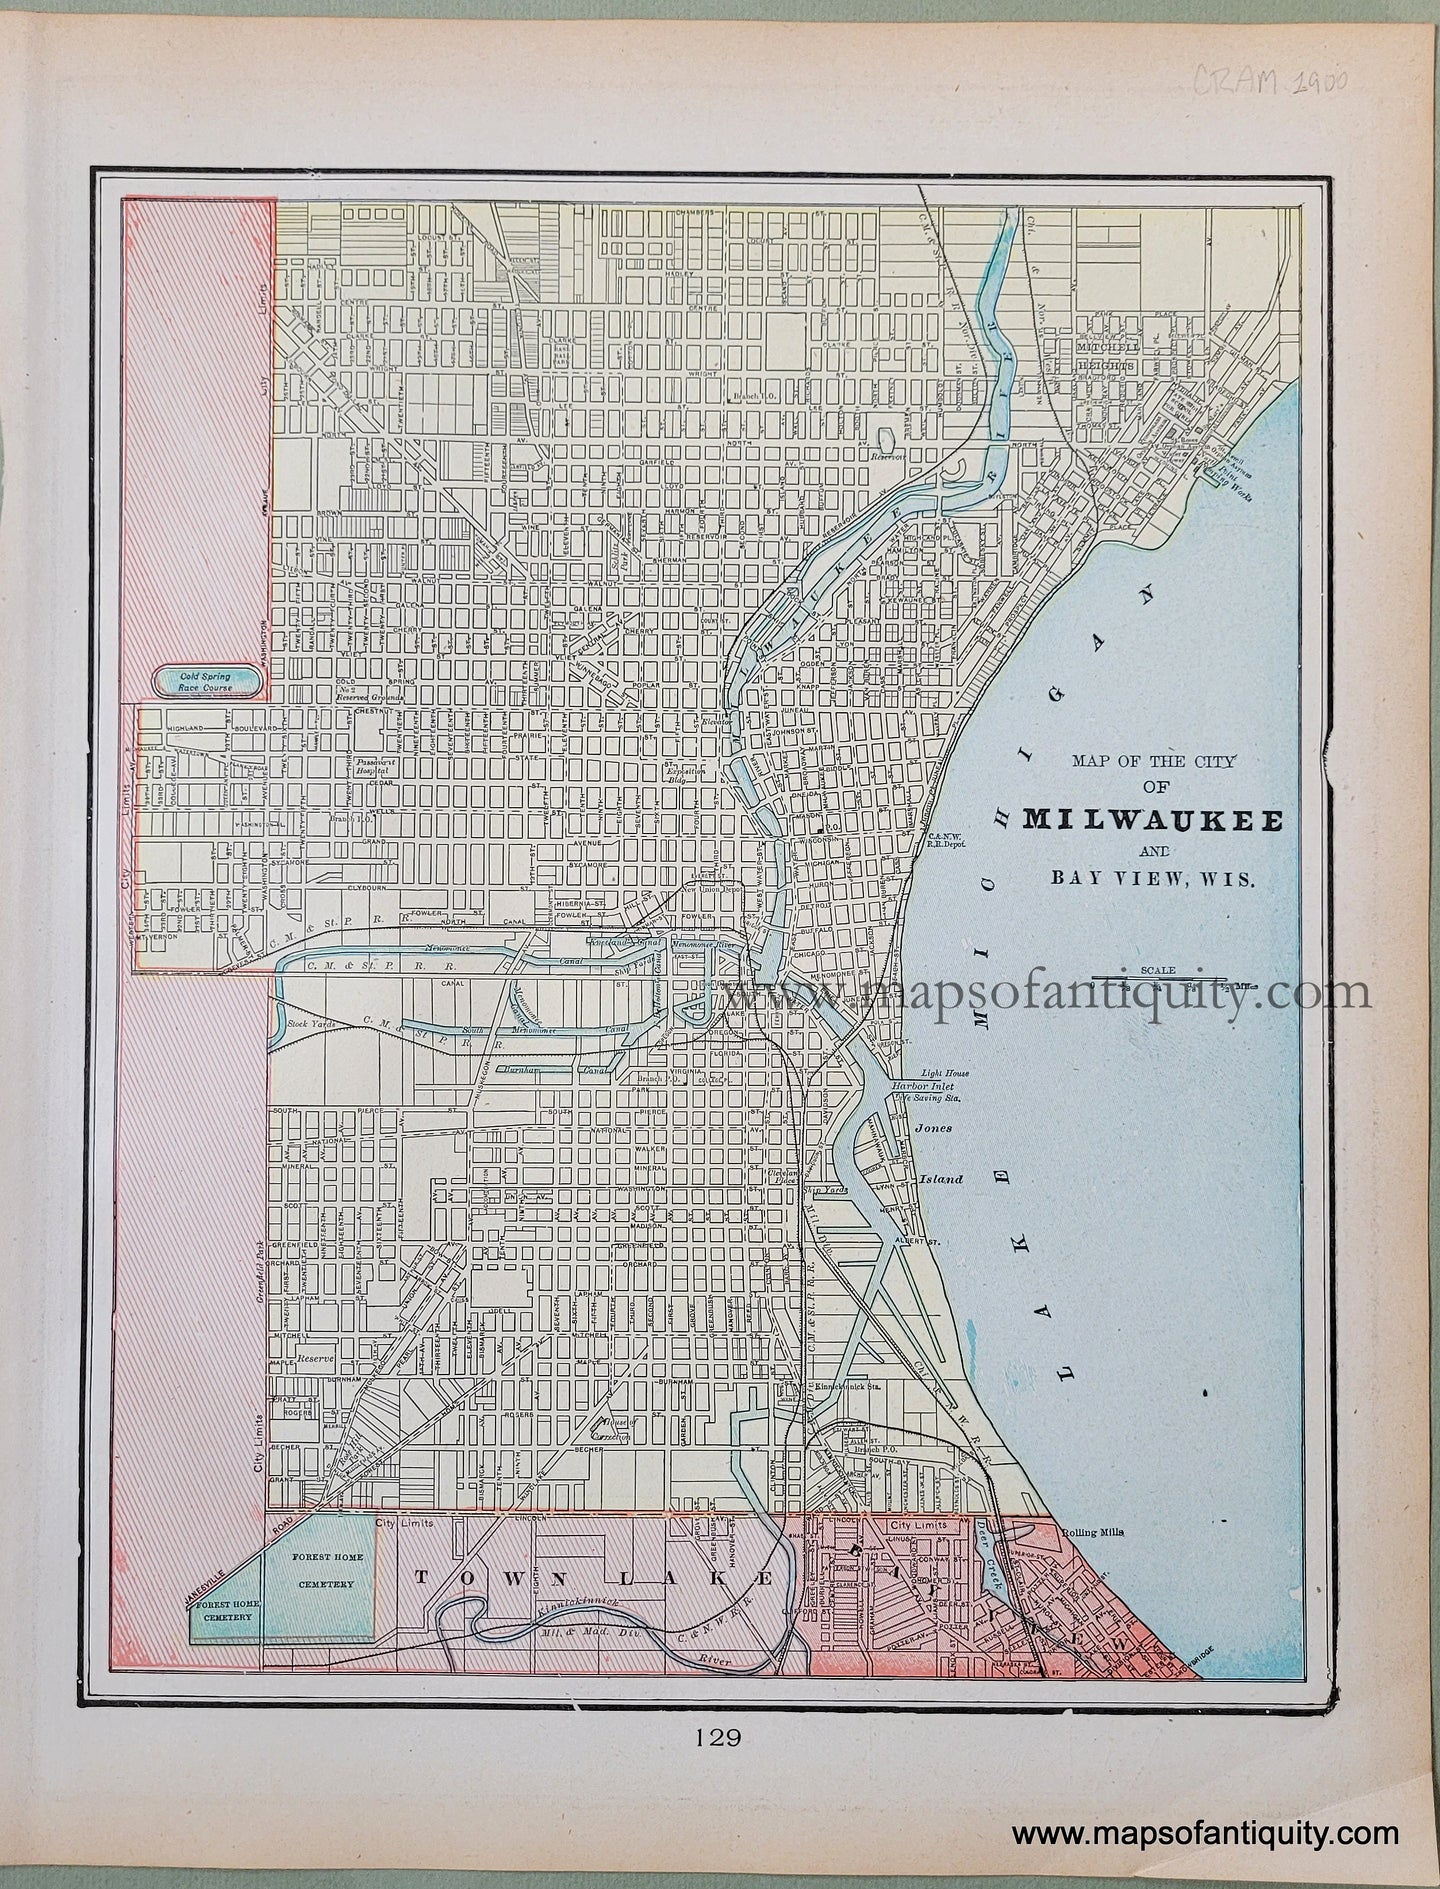 Antique-Printed-Color-Map-Map-of-the-City-of-Milwaukee-and-Bay-View-Wis.-Verso:-City-of-Superior-Wis.-North-America-Midwest-1900-Cram-Maps-Of-Antiquity